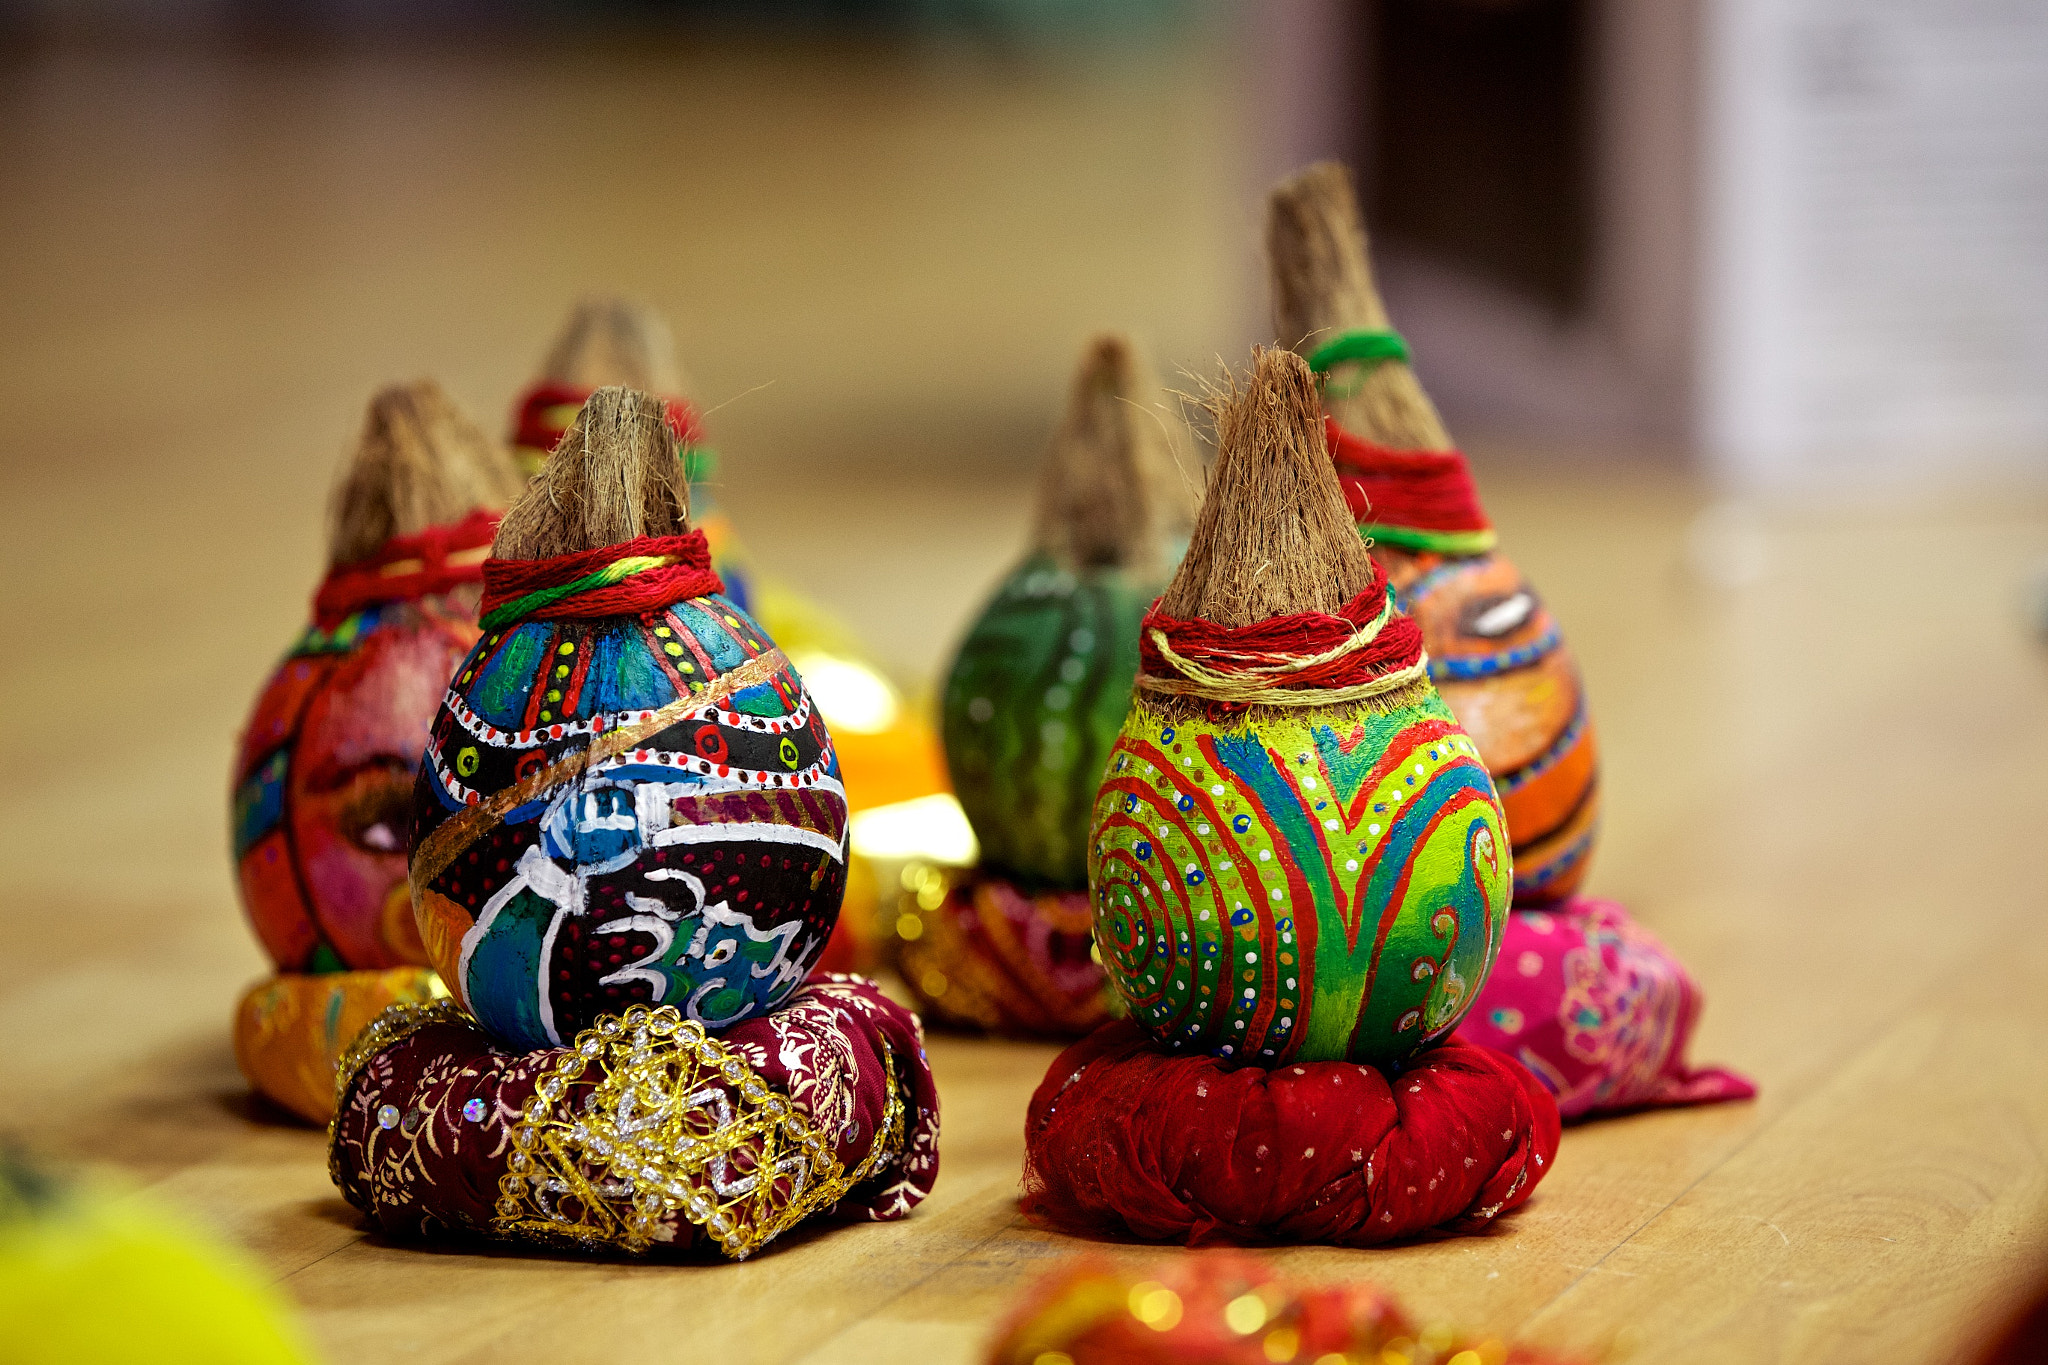 Beautifully decorated coconuts from PratibhaMistry.com